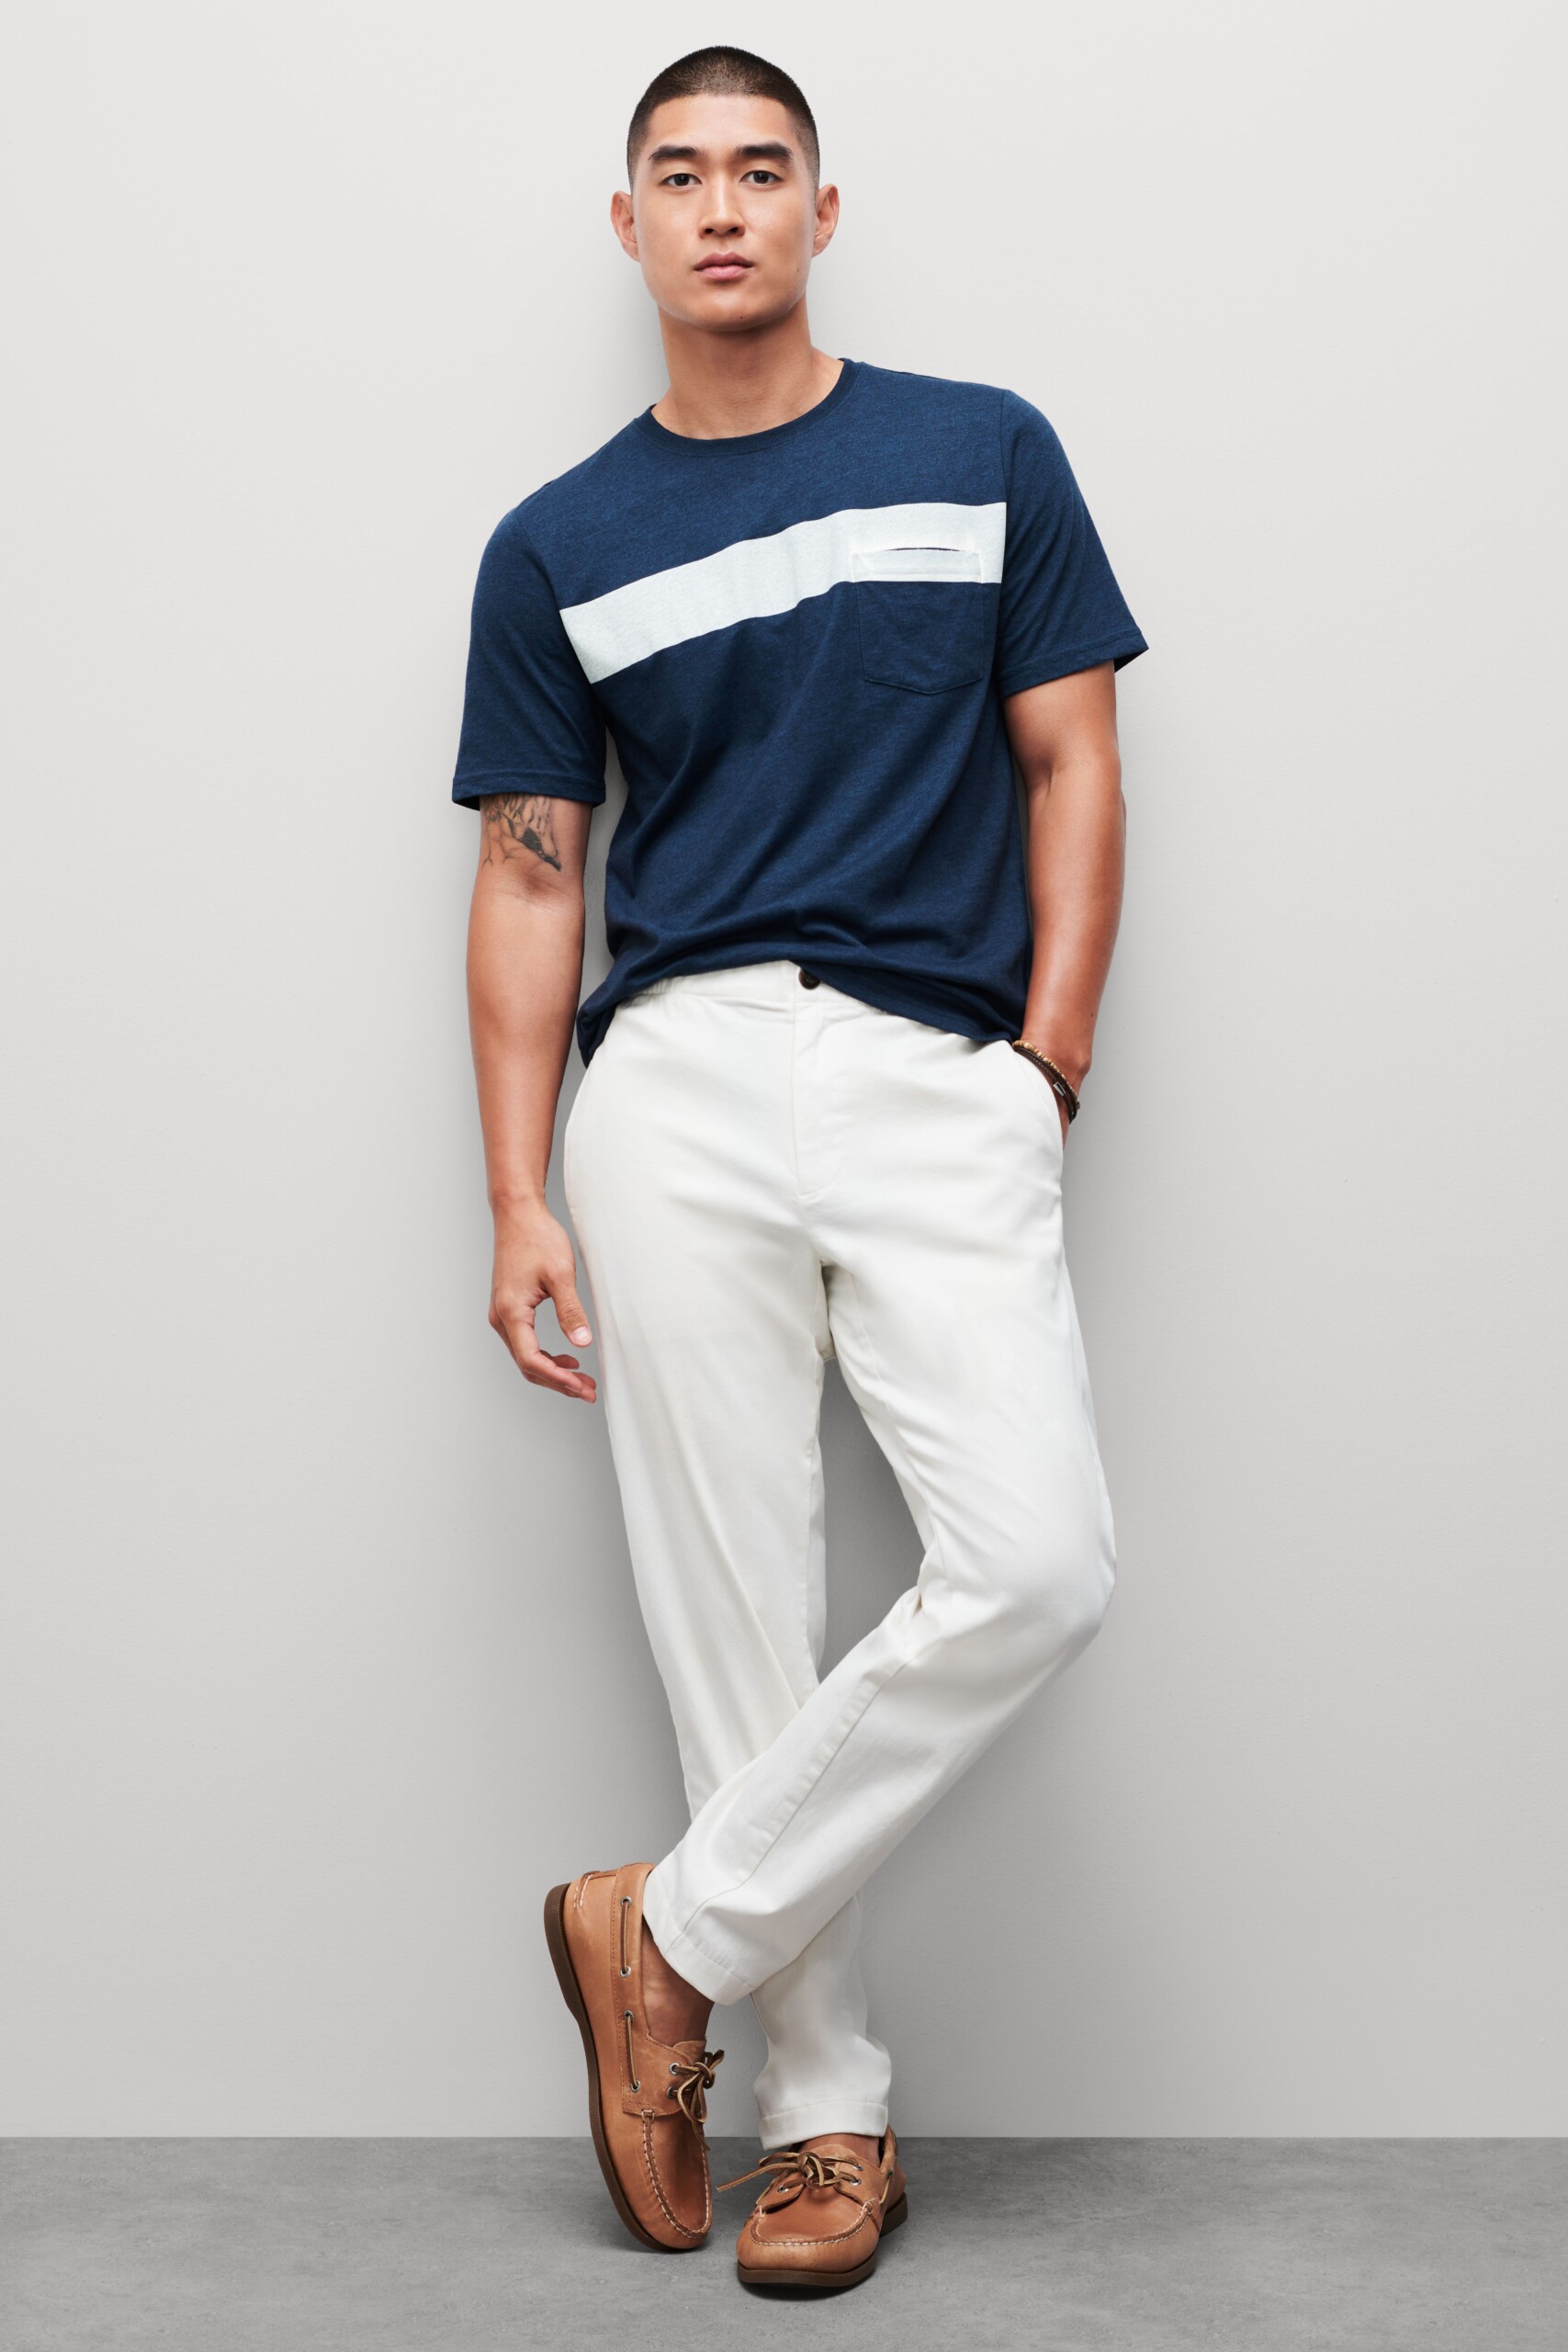 Give it to me straight: Can I tuck in T-shirt? | Stitch Fix Men